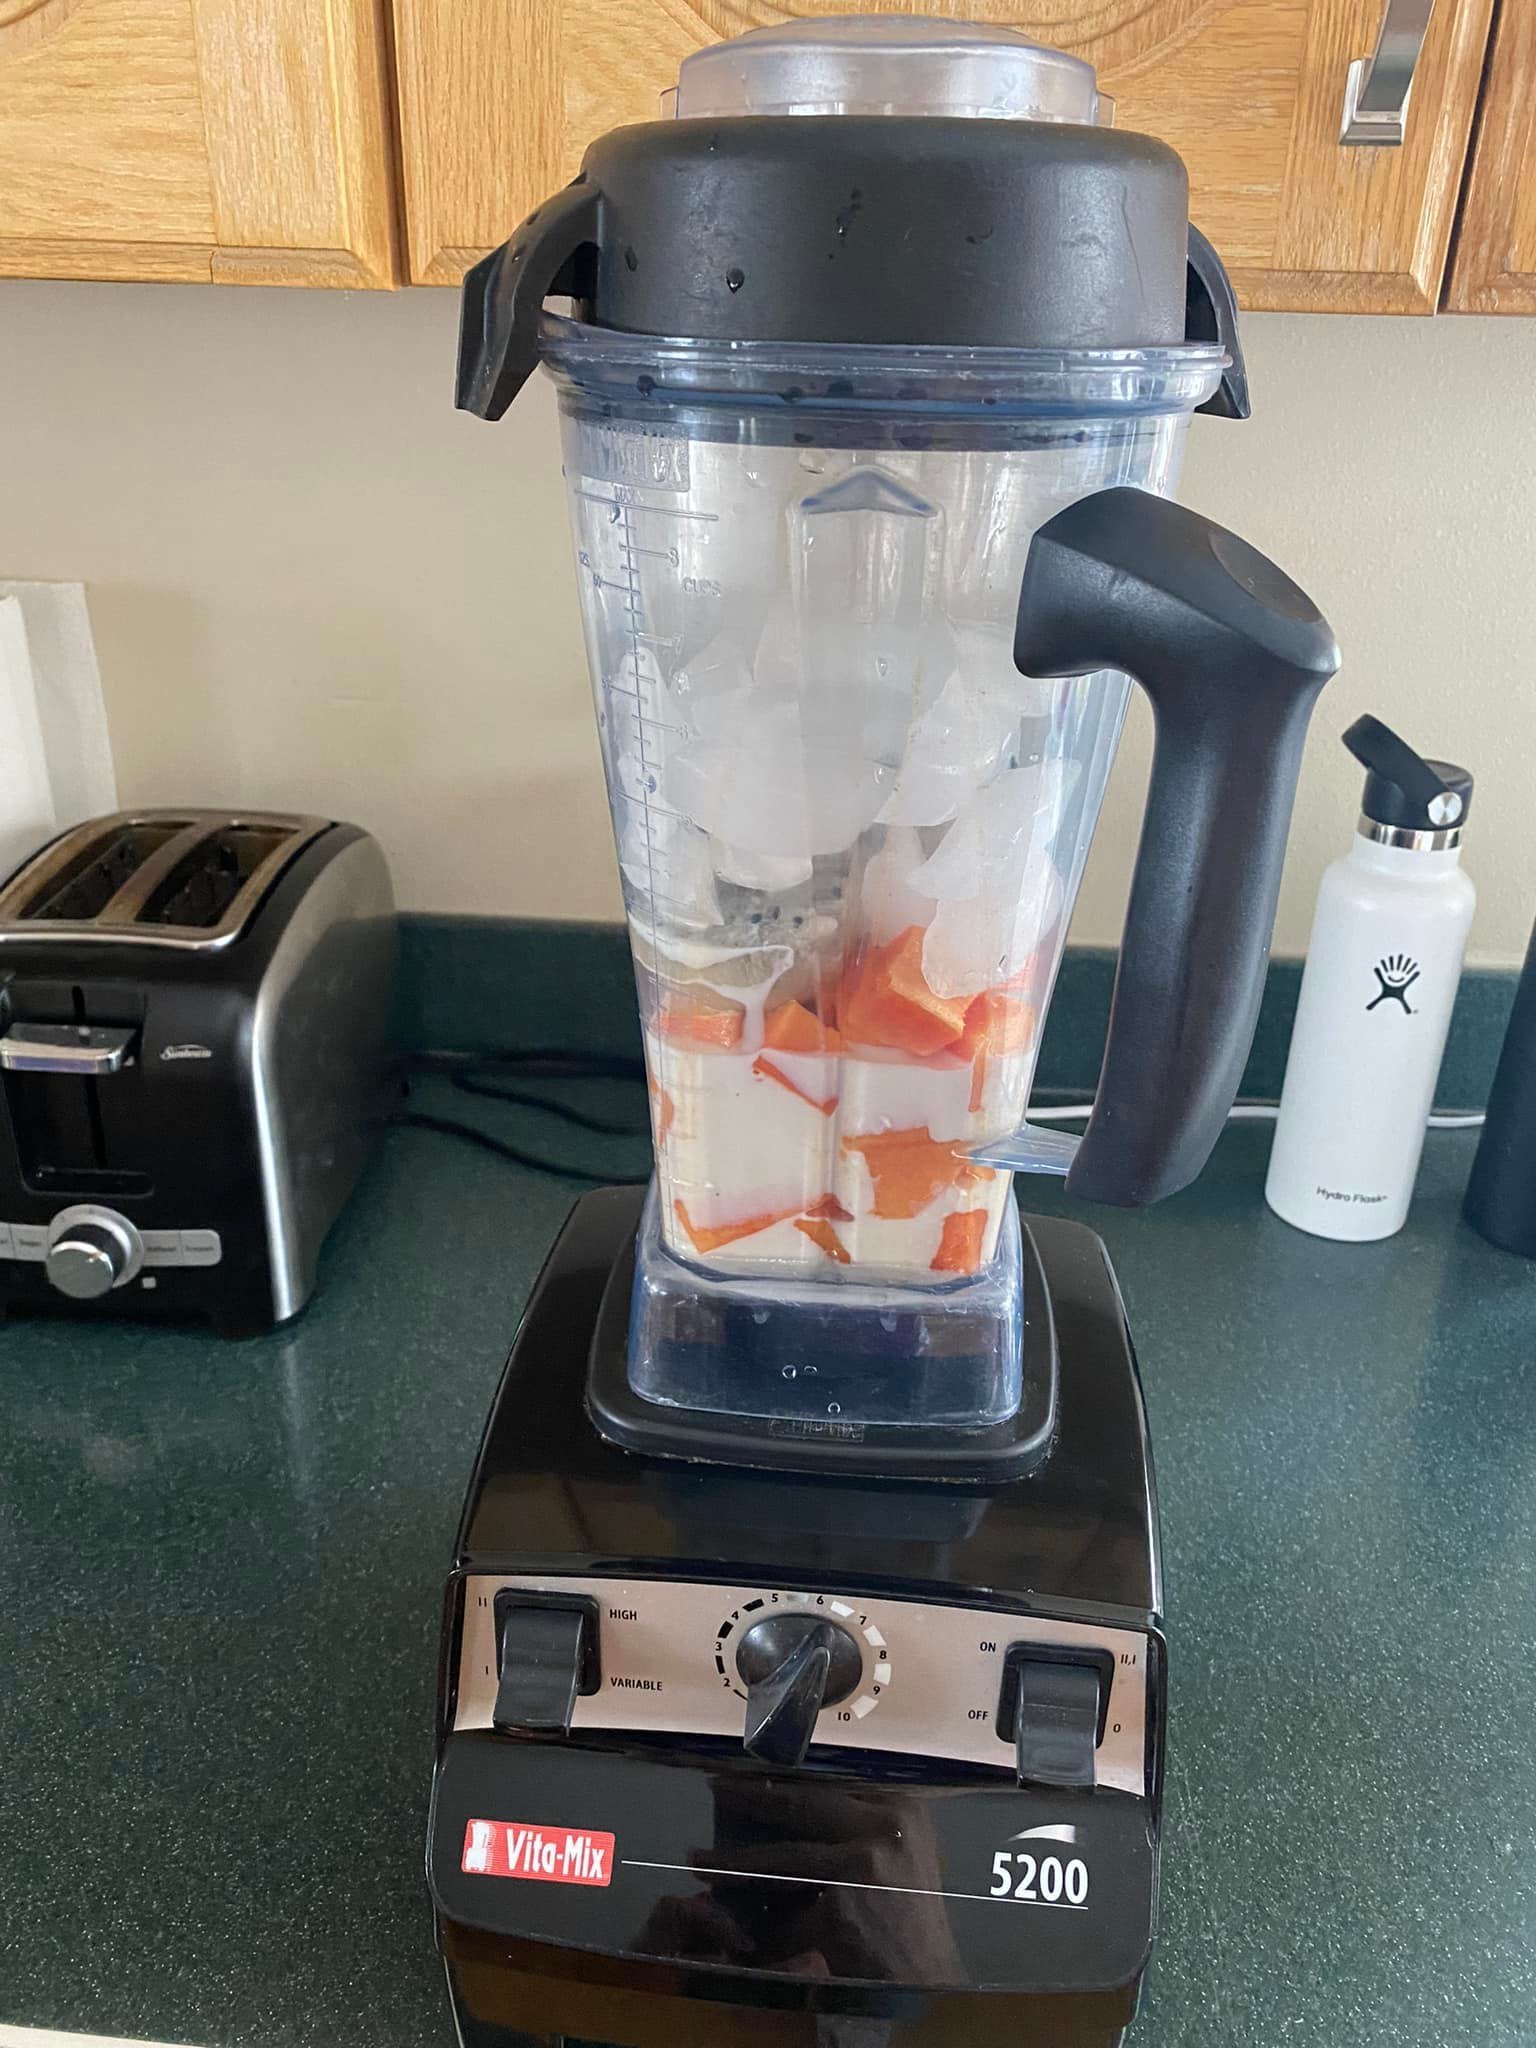 Vitamix 5200 blender has a much larger size